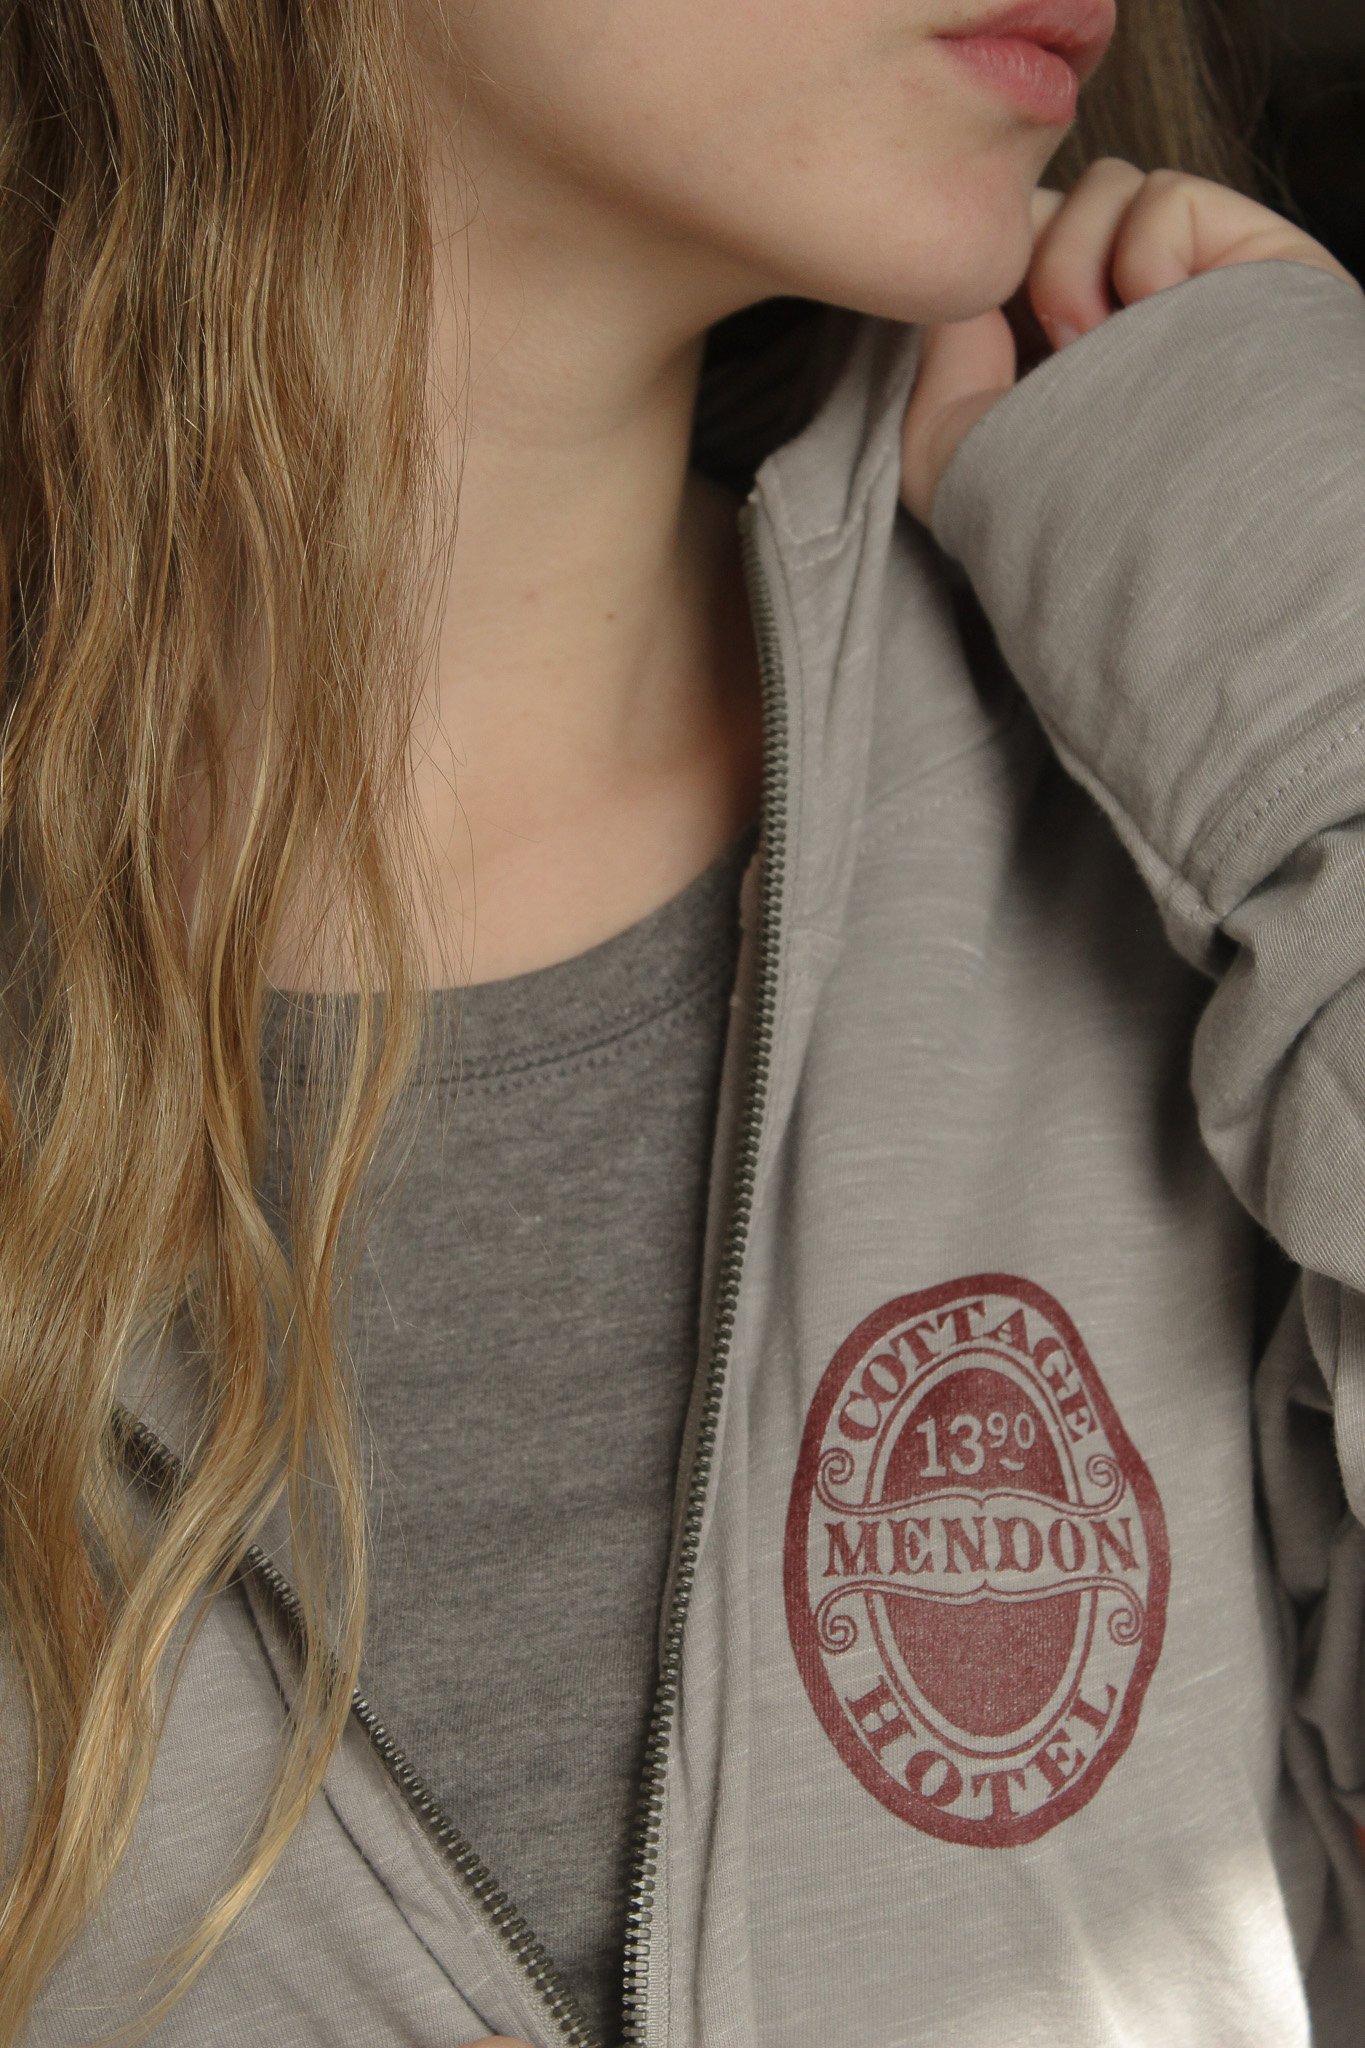 Cottage Hotel of Mendon Gray Hoodie Up Close Merch Mendon NY.jpg